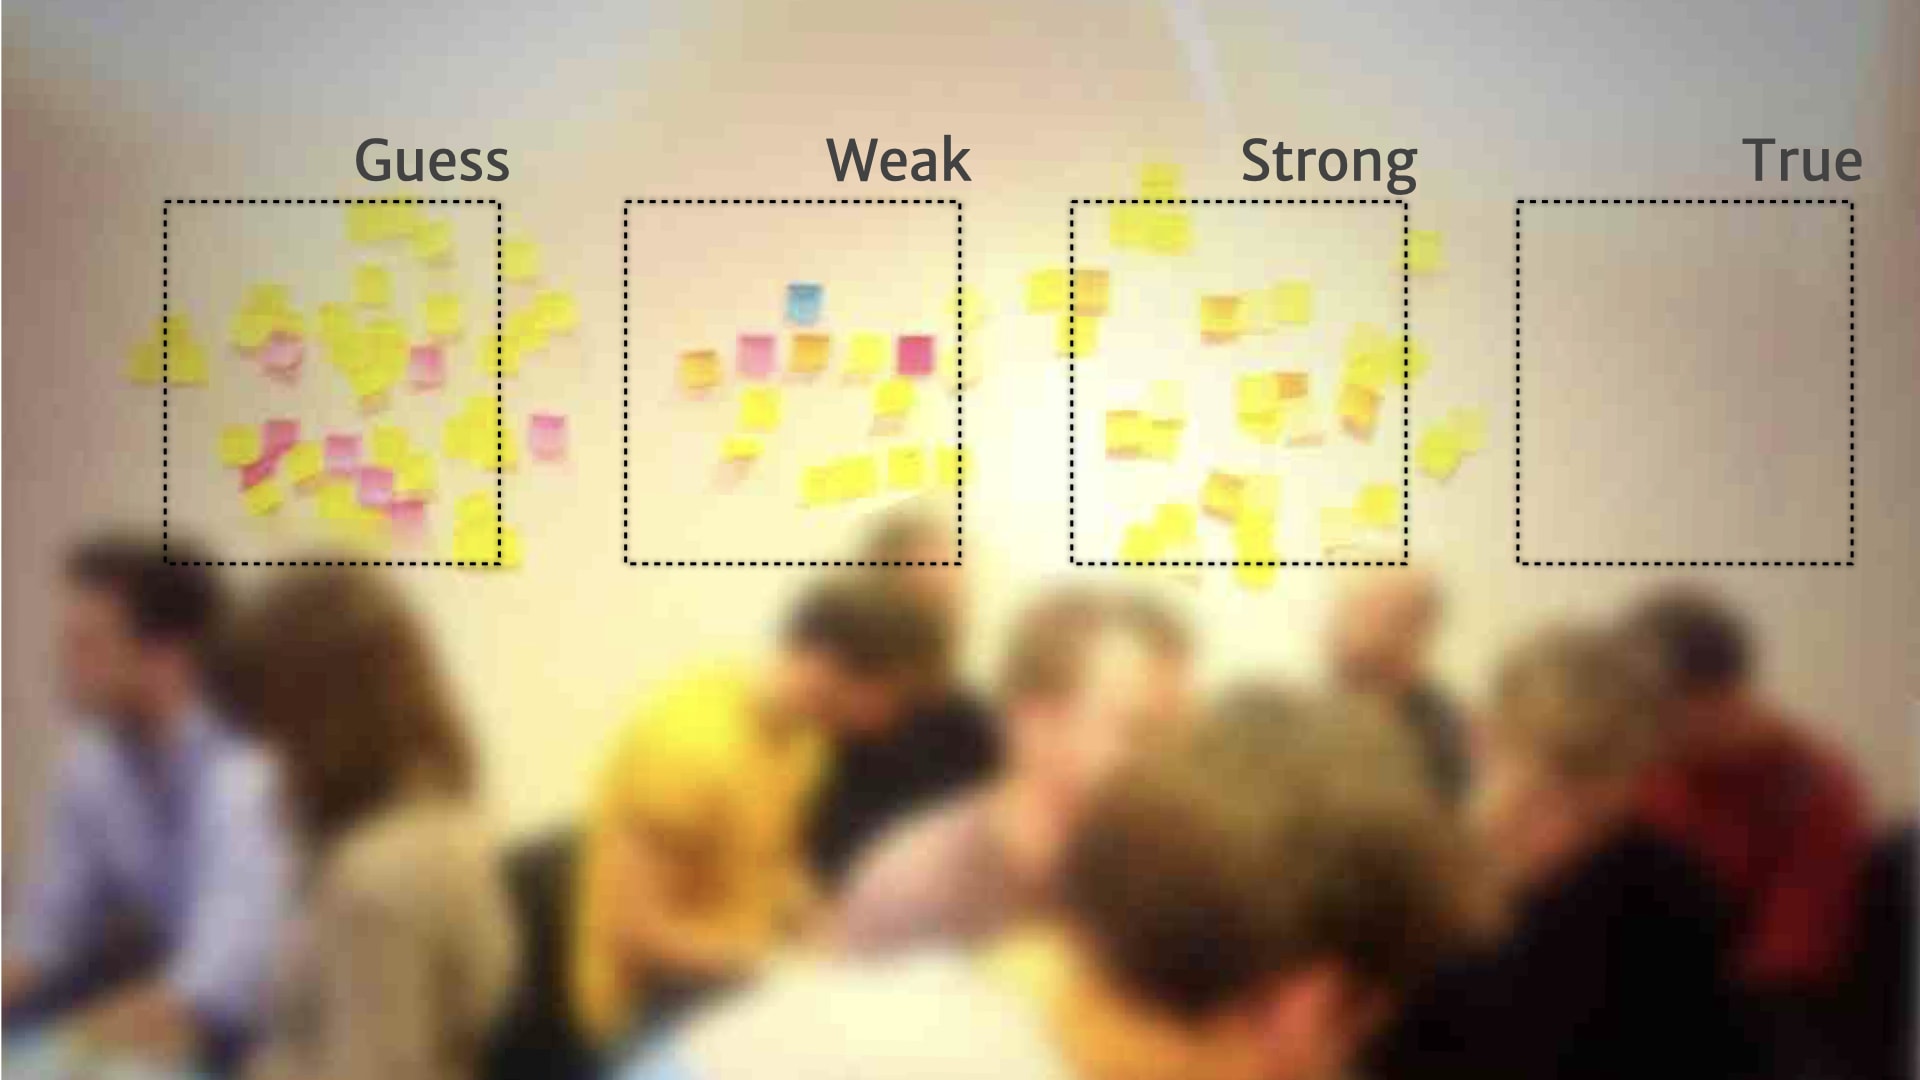 A picture of a wall of post-it notes divided into four roughly equal categories. Running from left-to-right the categories are Guess, Weak, Stong, and True. There are no post-it notes in the 'True' category.